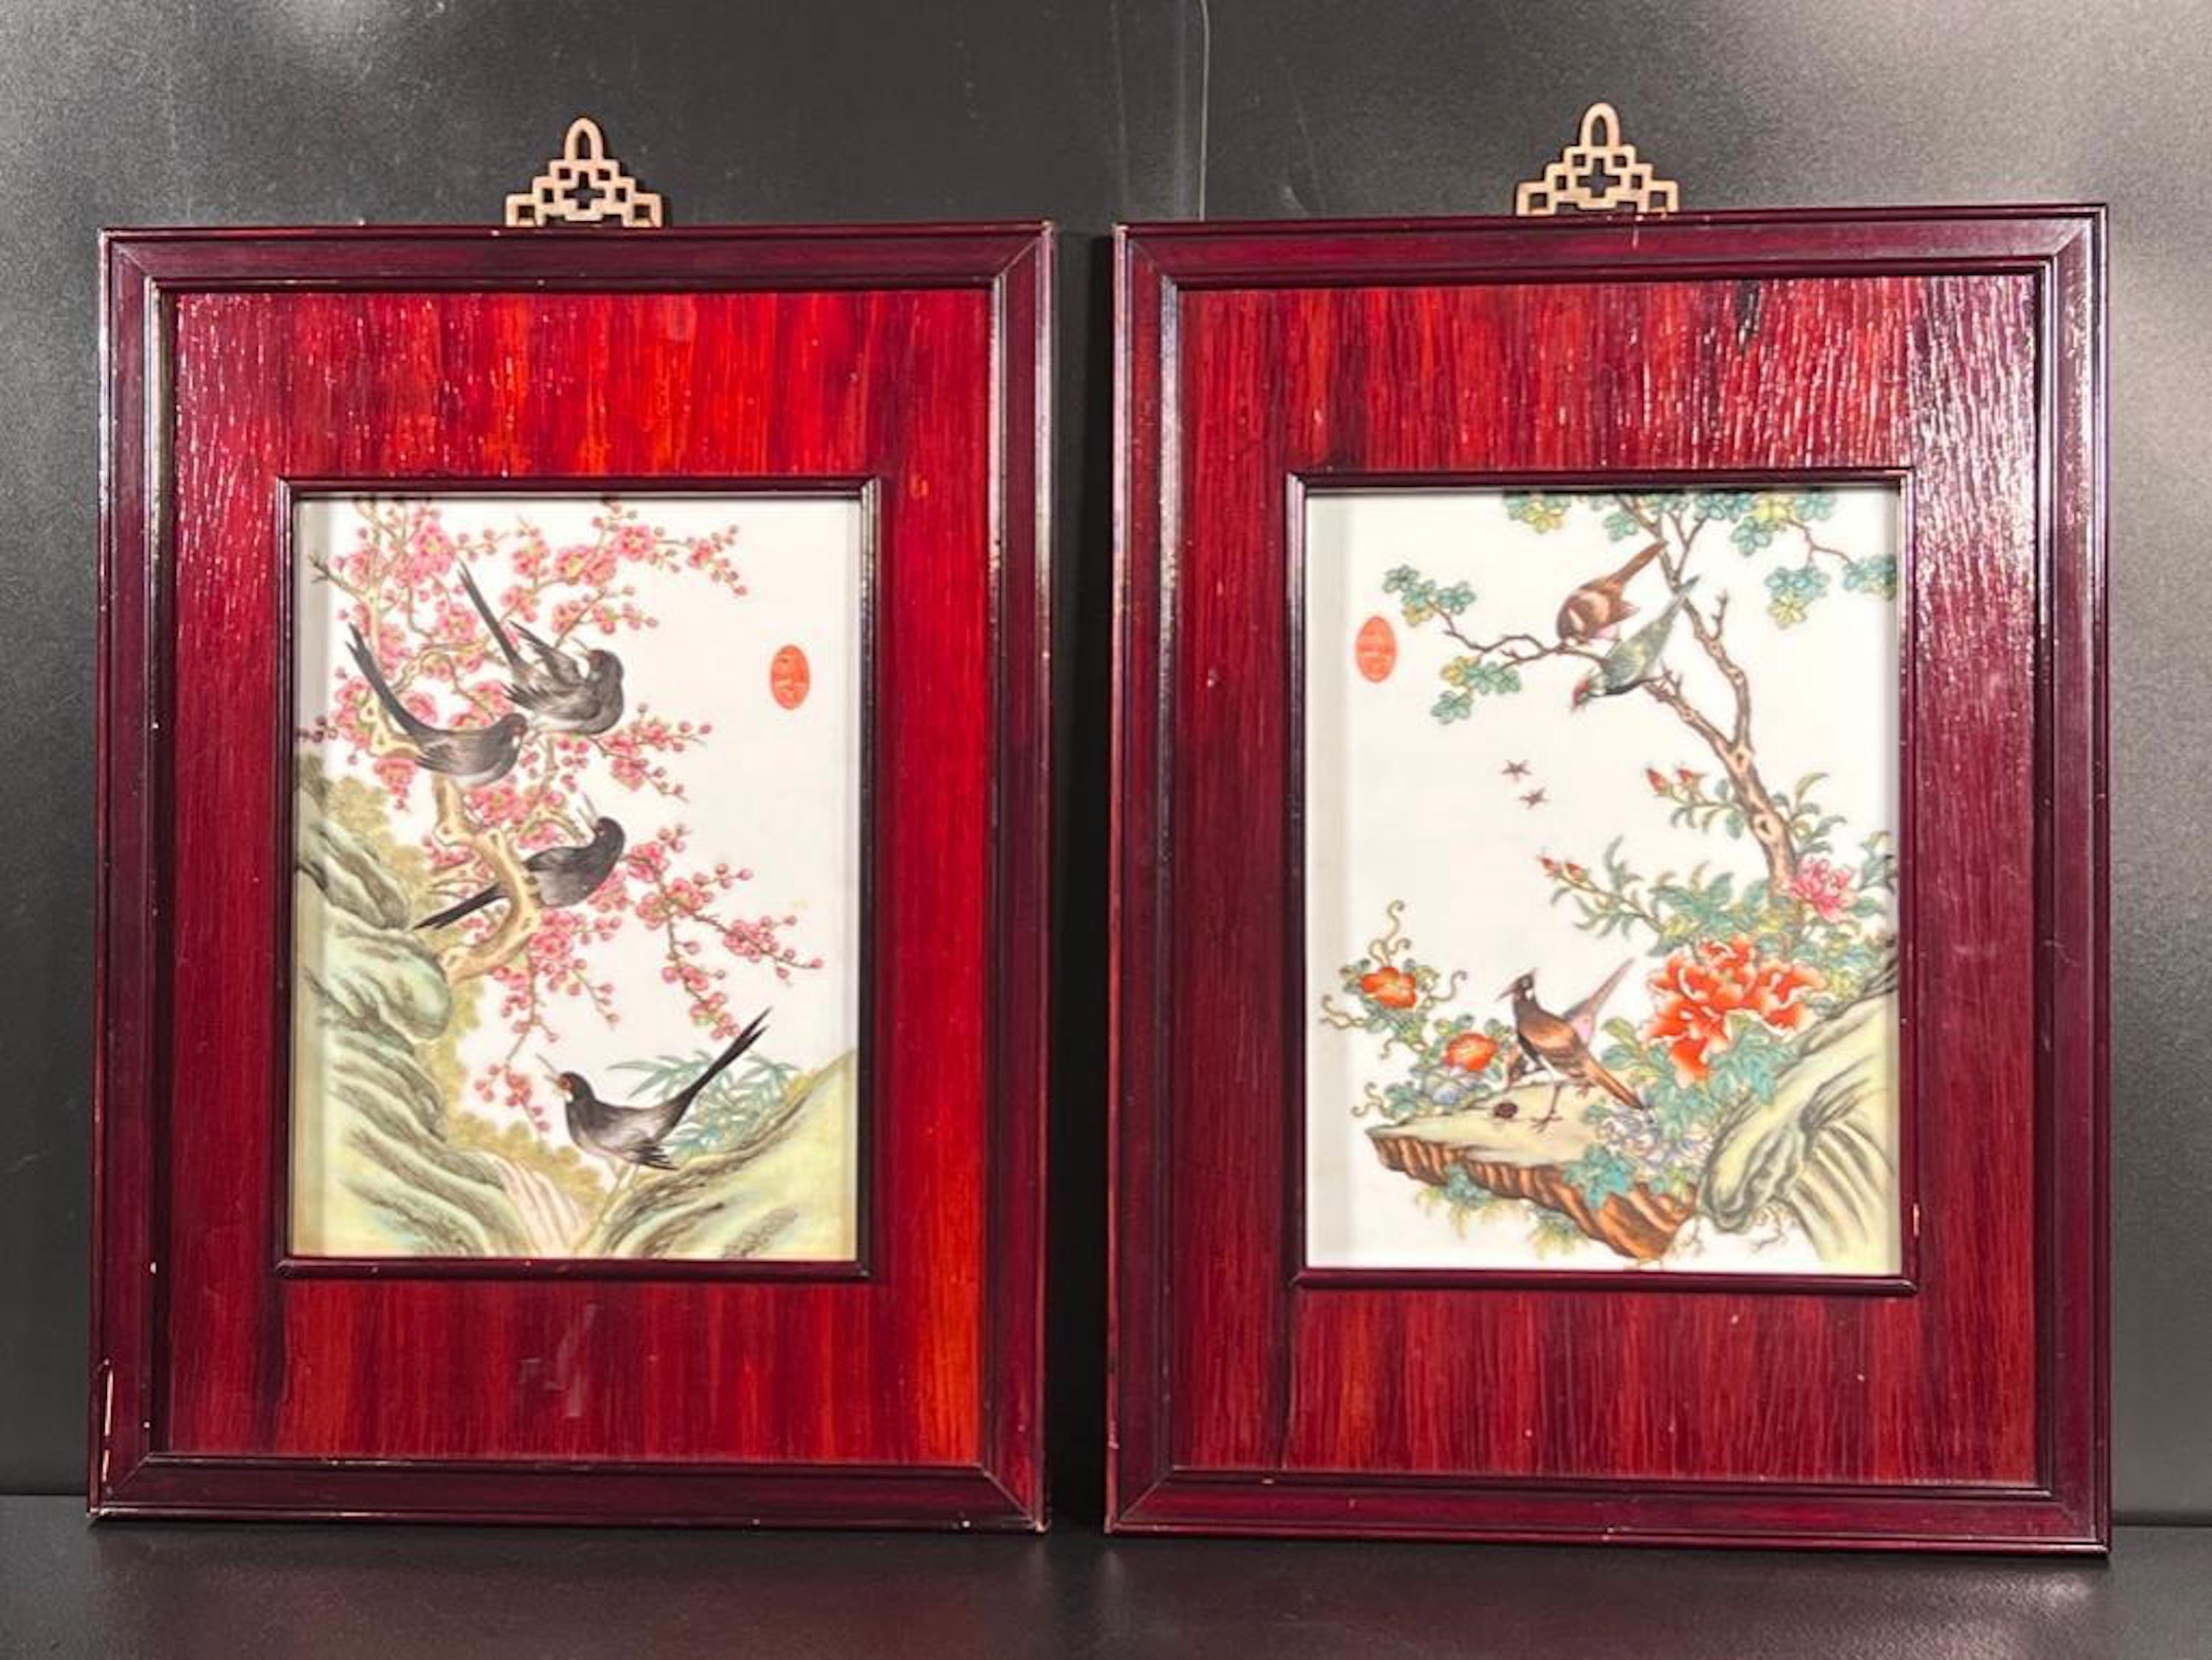 Pair of framed Chinese porcelain plaques, est. $100-$300